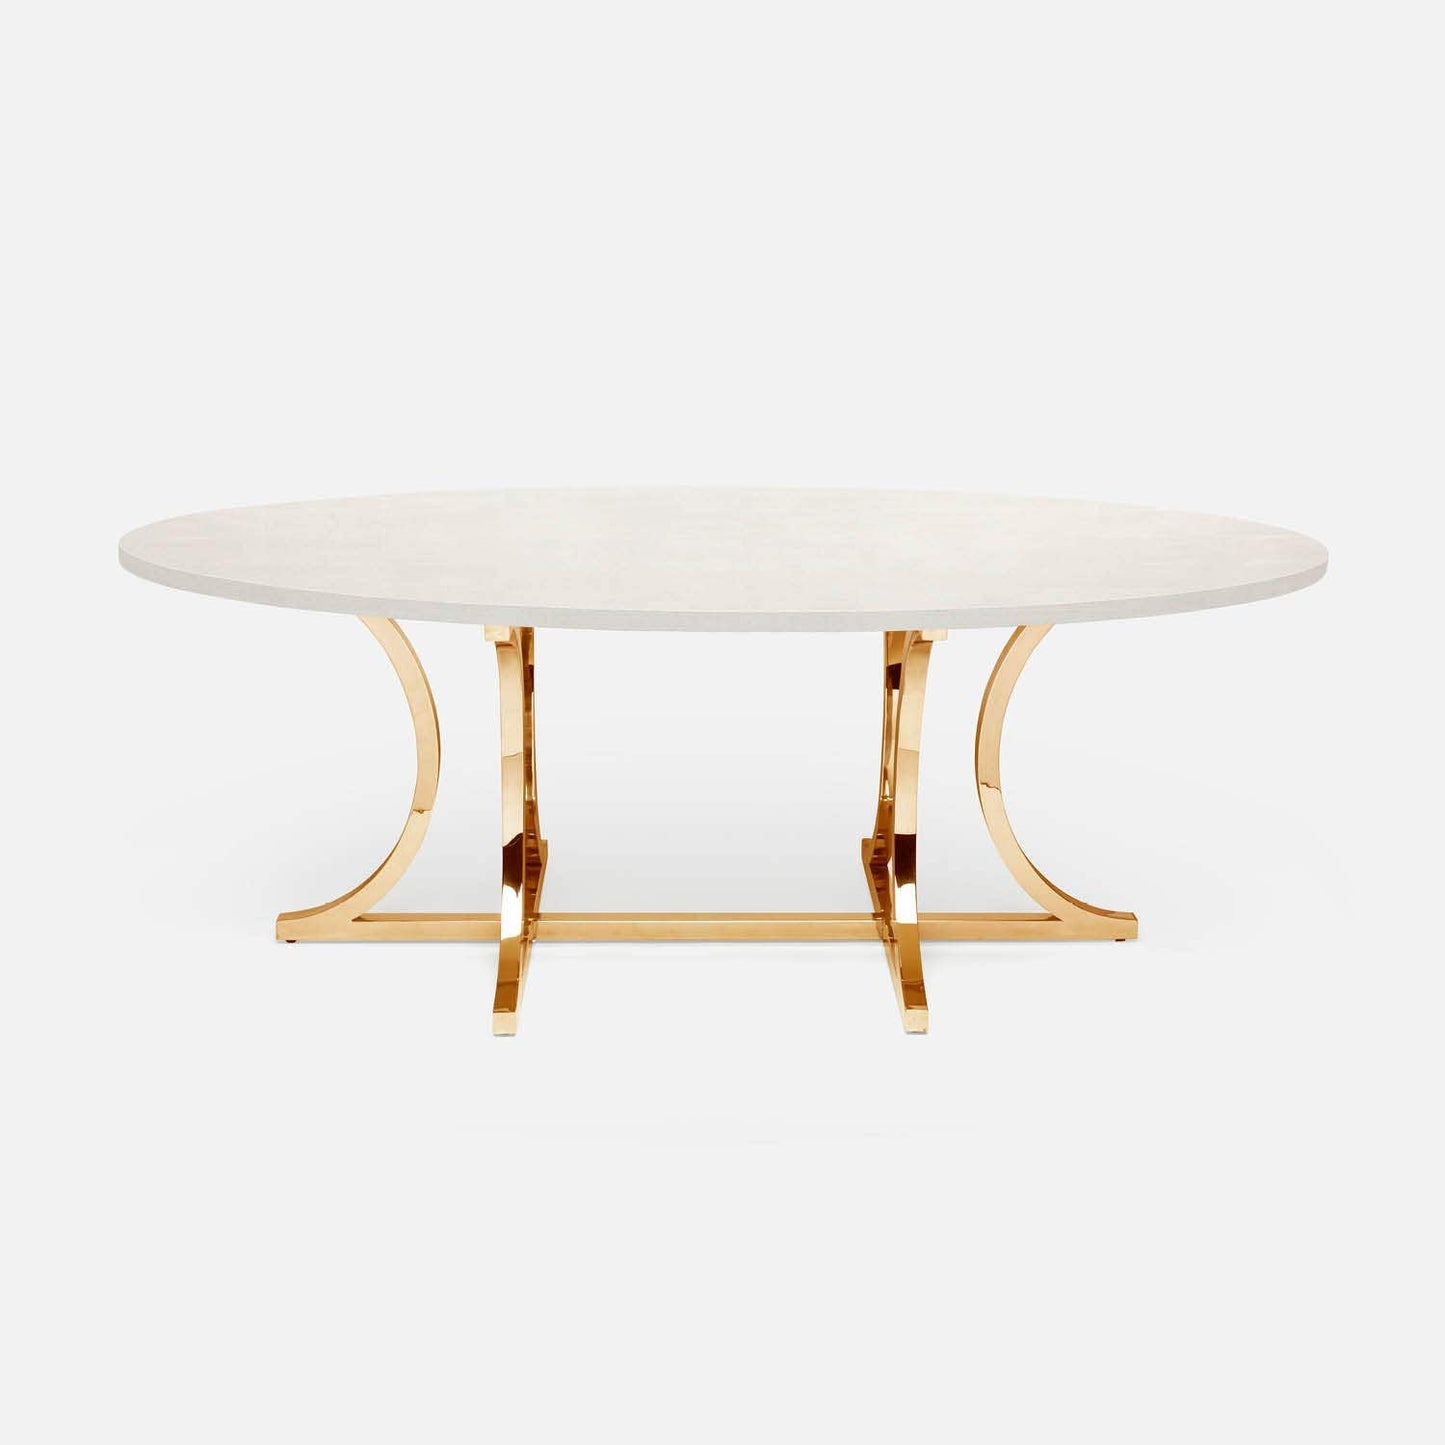 Made Goods Leighton 84" x 42" x 30" Polished Gold Steel Dinning Table With Oval Pristine Vintage Faux Shagreen Table Top